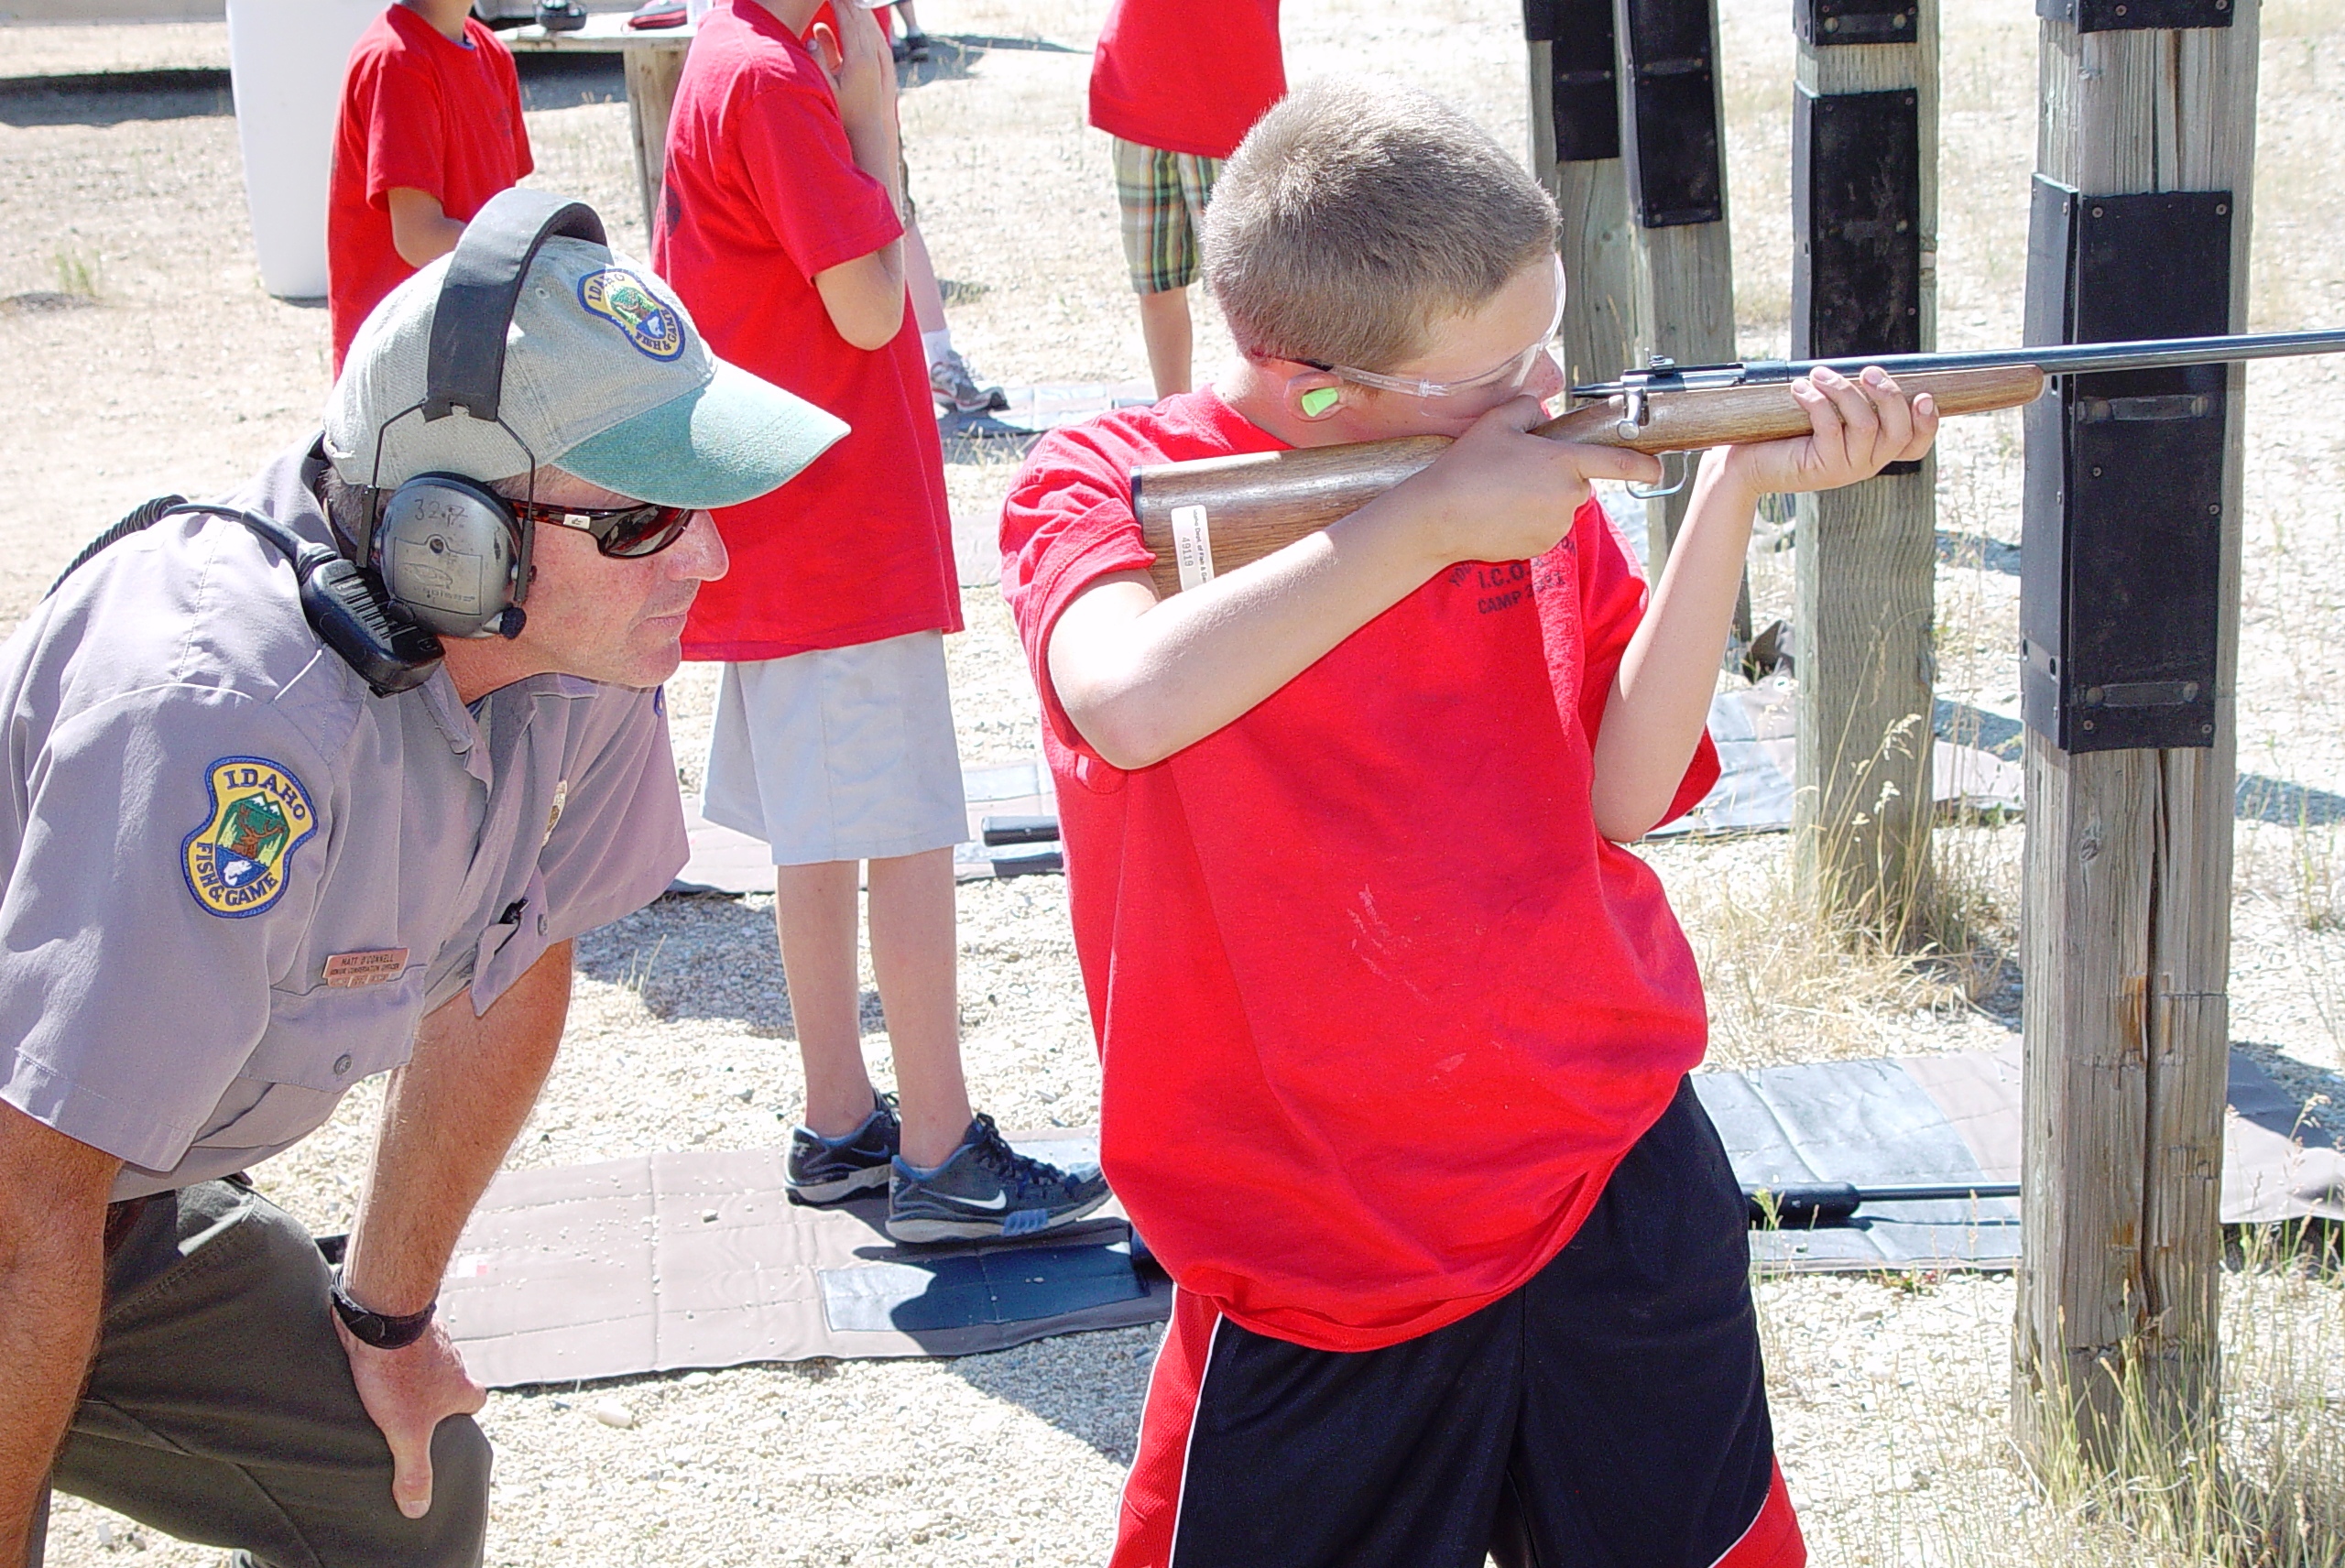 IDFG Conservation Officer Matt O'Connell watches as a boy aims his rifle at a Hunter Education class August 2011